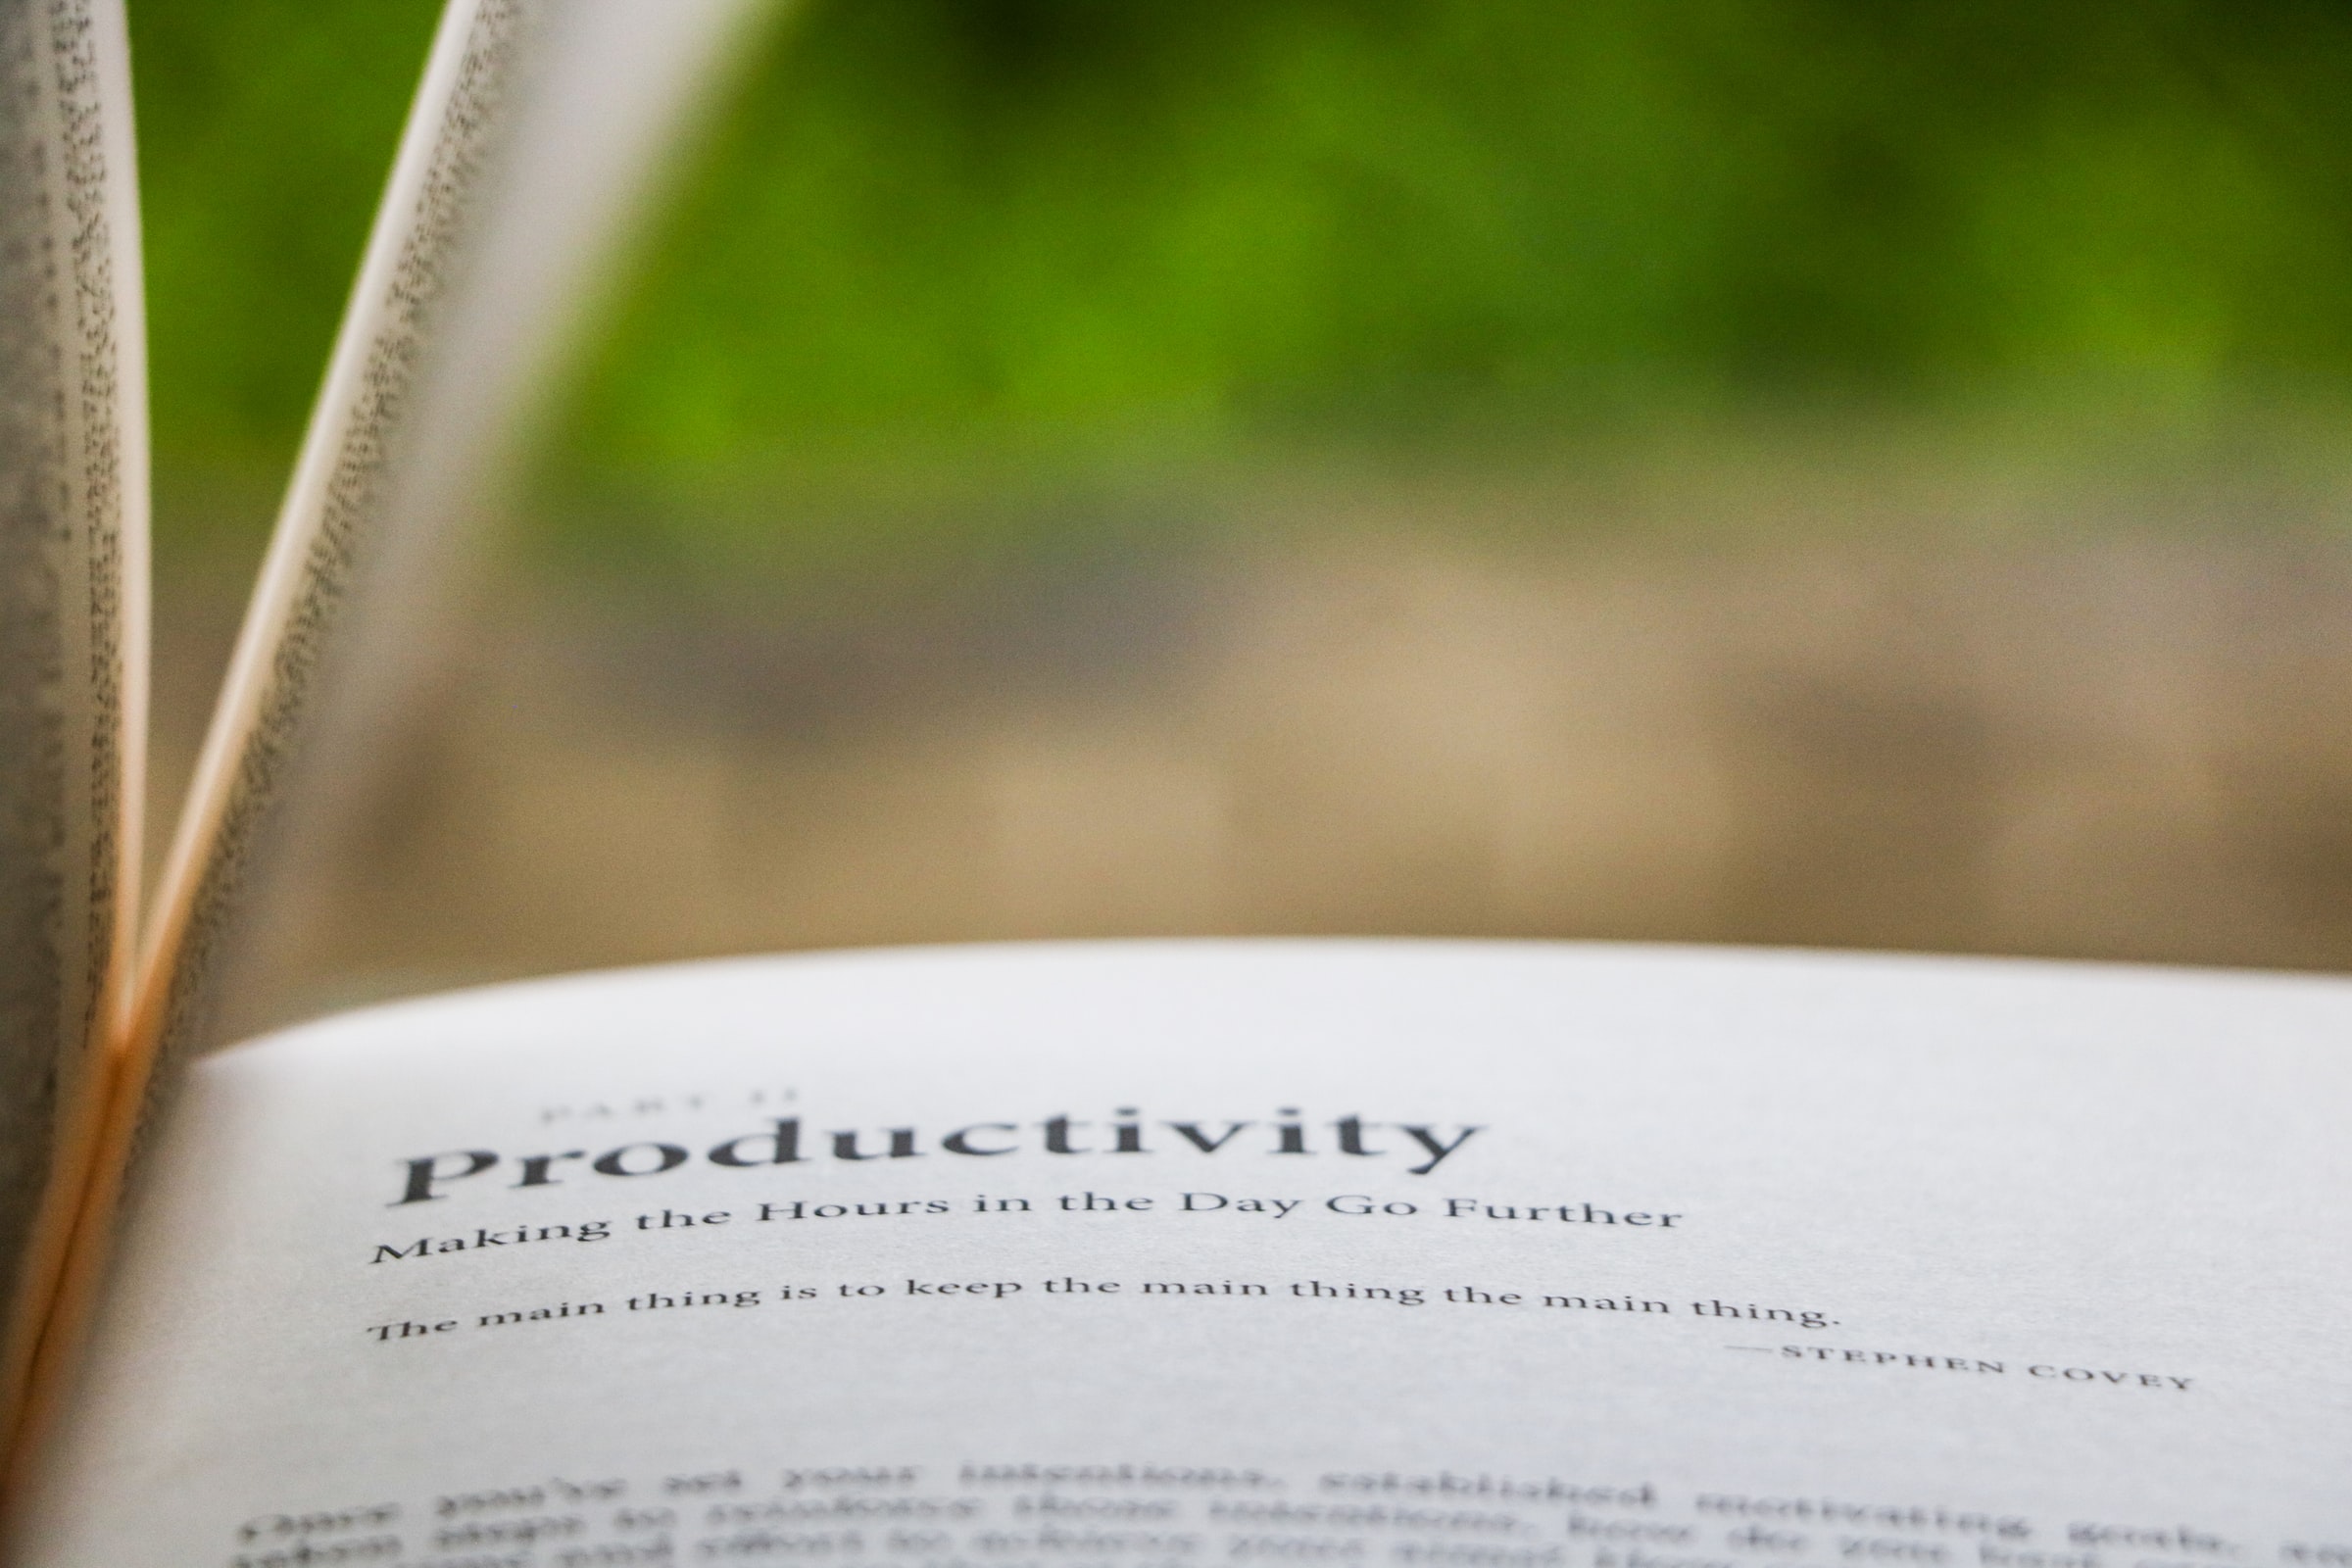 Book chapter opened at the word Productivity